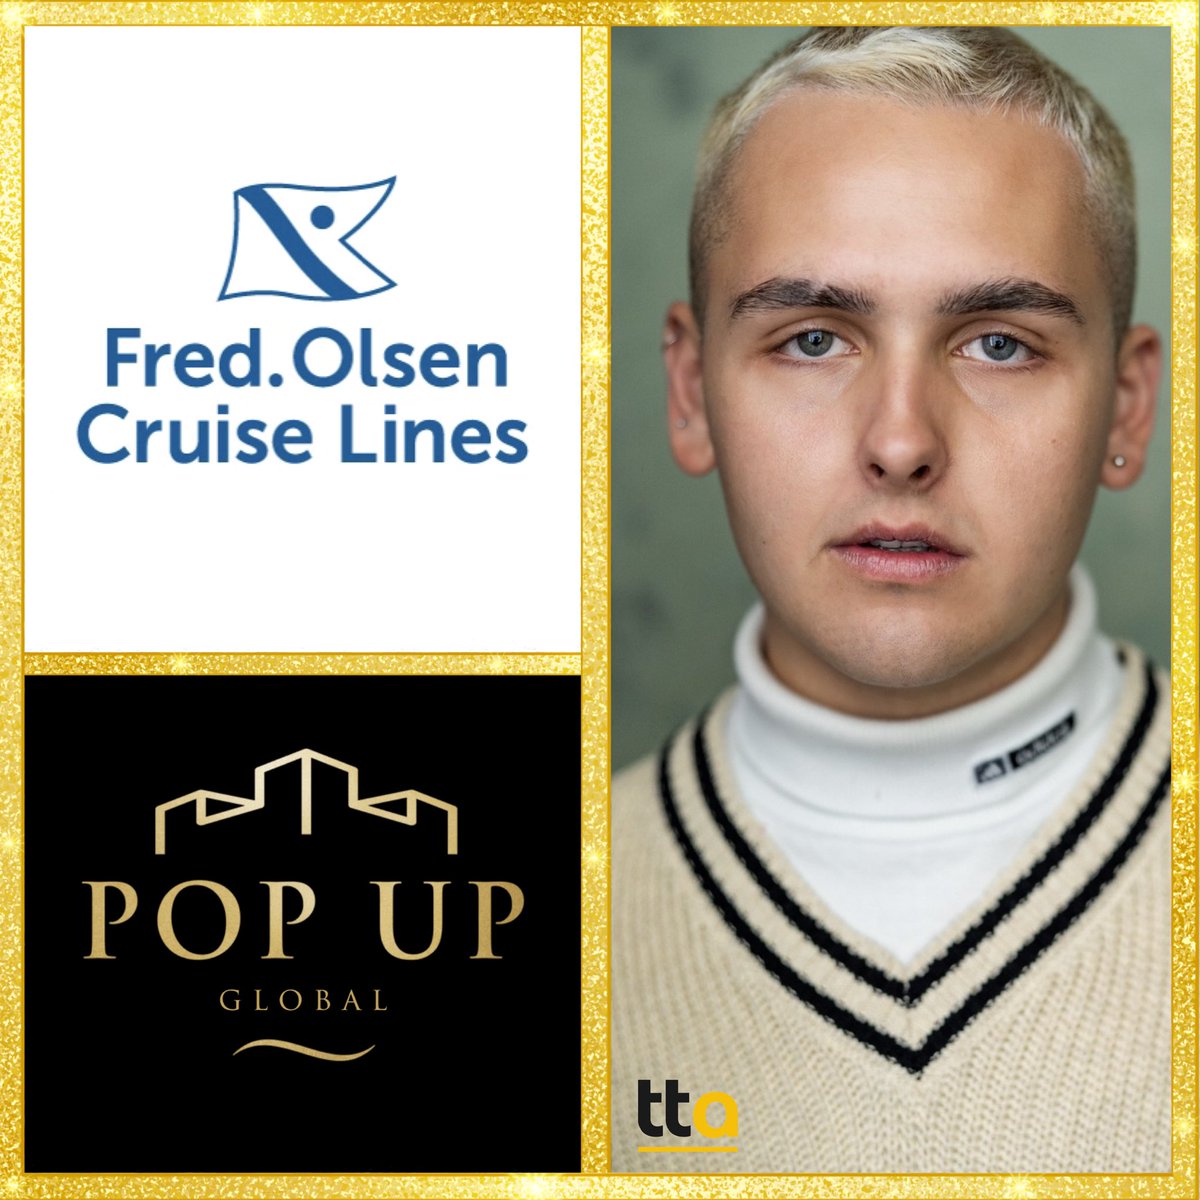 Thrilled to finally announce that our fantastic MICHAEL ANDREW-MARTIN is soon to embark on a Cruise Contract with Fred Olsen Cruise Lines✨ ⭐️Client: MICHAEL ANDREW-MARTIN ✨Company: @FredOlsenCruise #tta #ttaadults #fredolsencruiselines